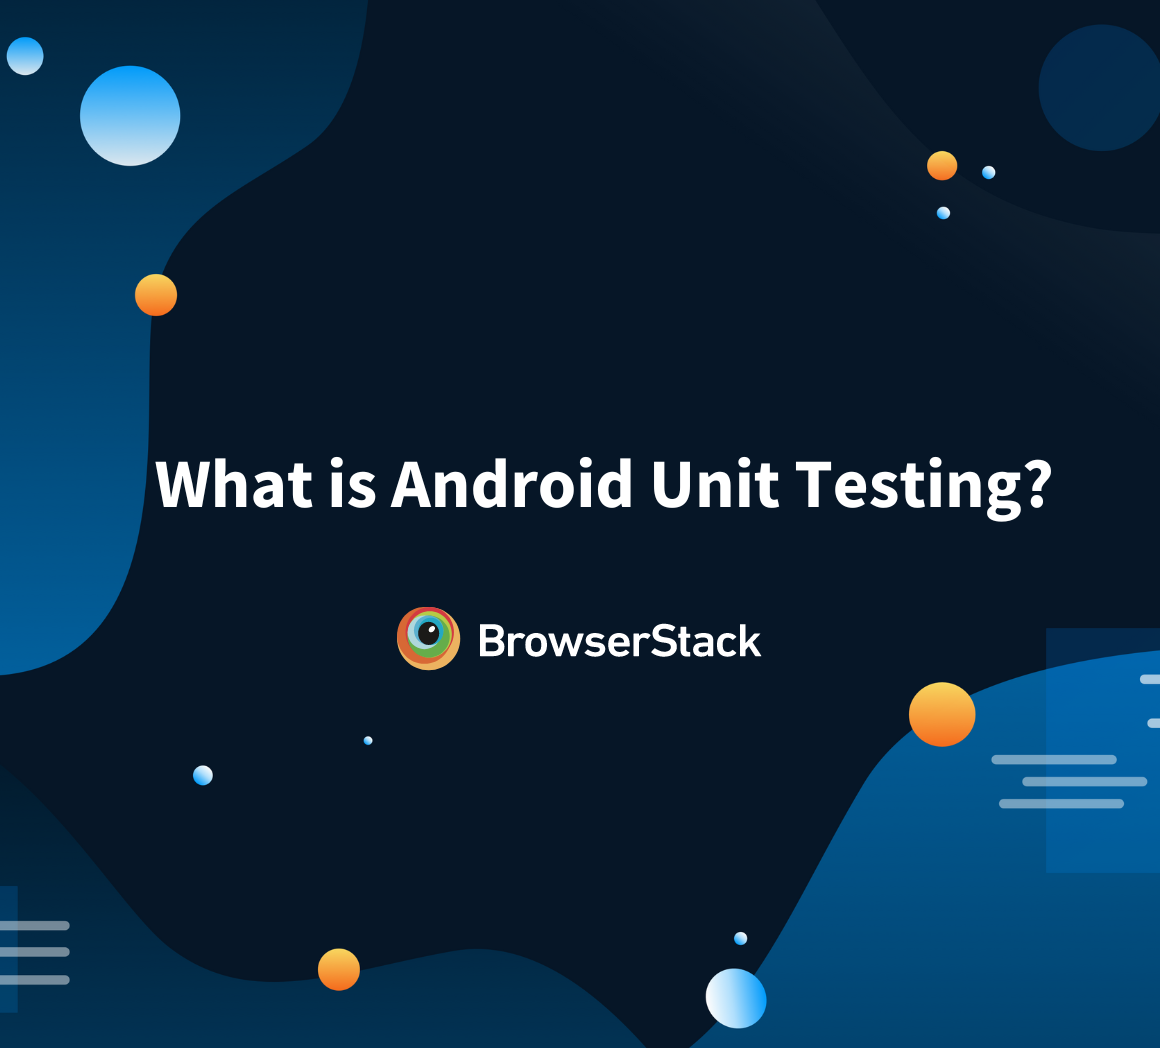 gradle - Right click and create JUnit tests in Android Studio